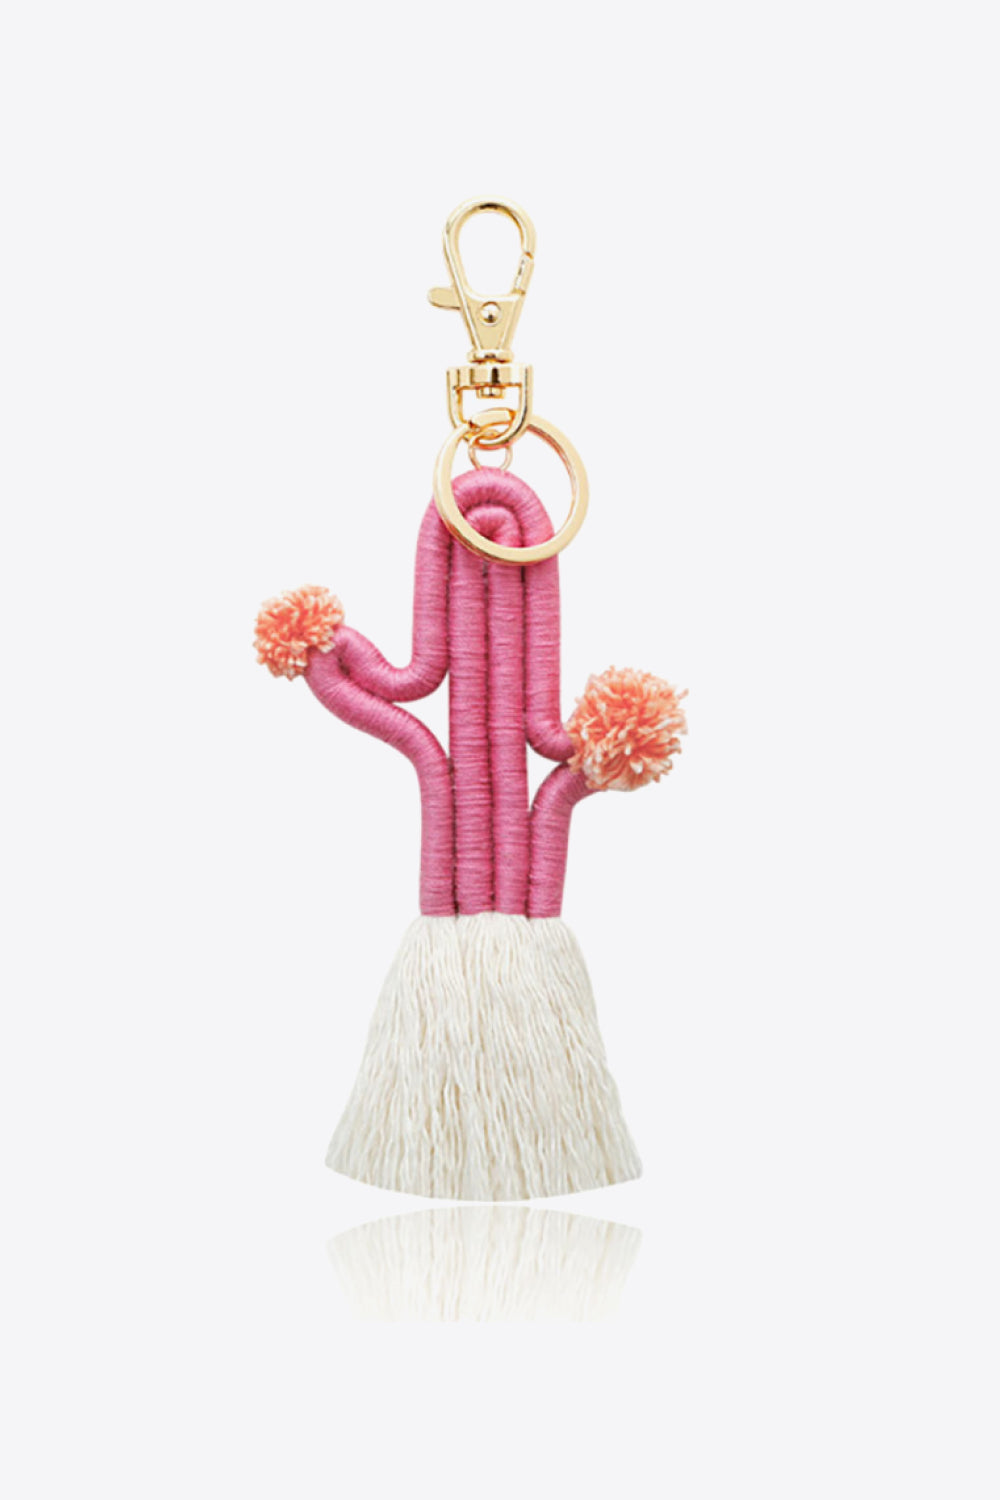 Trendsi Cupid Beauty Supplies Fuchsia Pink / One Size Keychains Cactus Keychain with Fringe